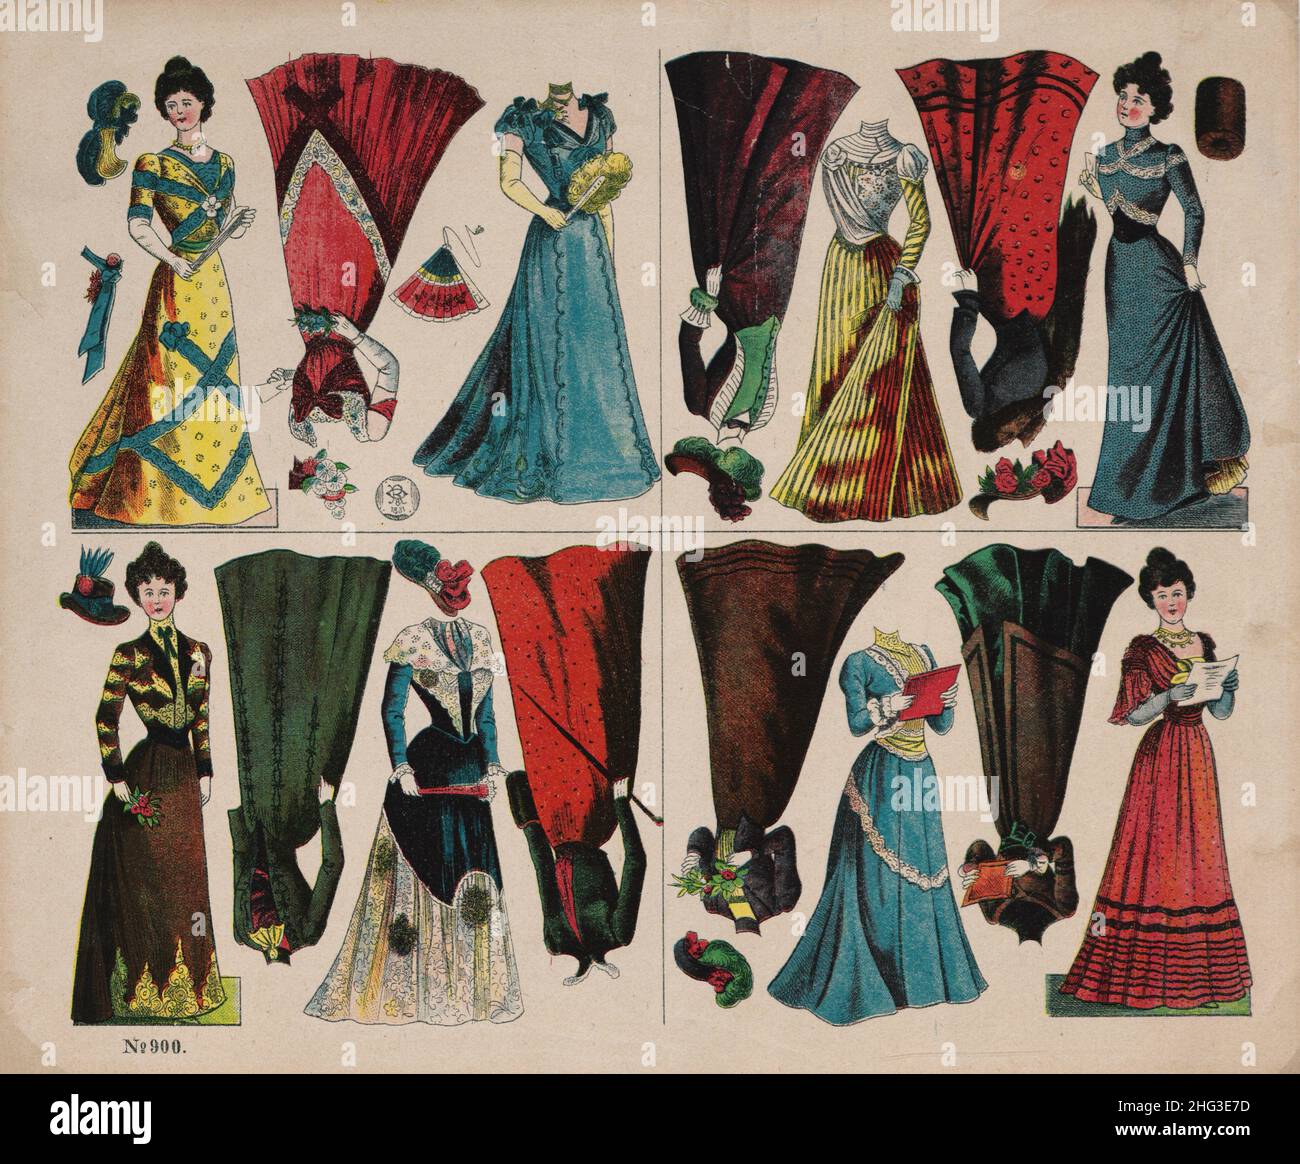 The 19th century vintage illustrations of dress-up dolls for cutting, 1914 German fashion of 1914, German women's fashion of 1914, vintage German wome Stock Photo